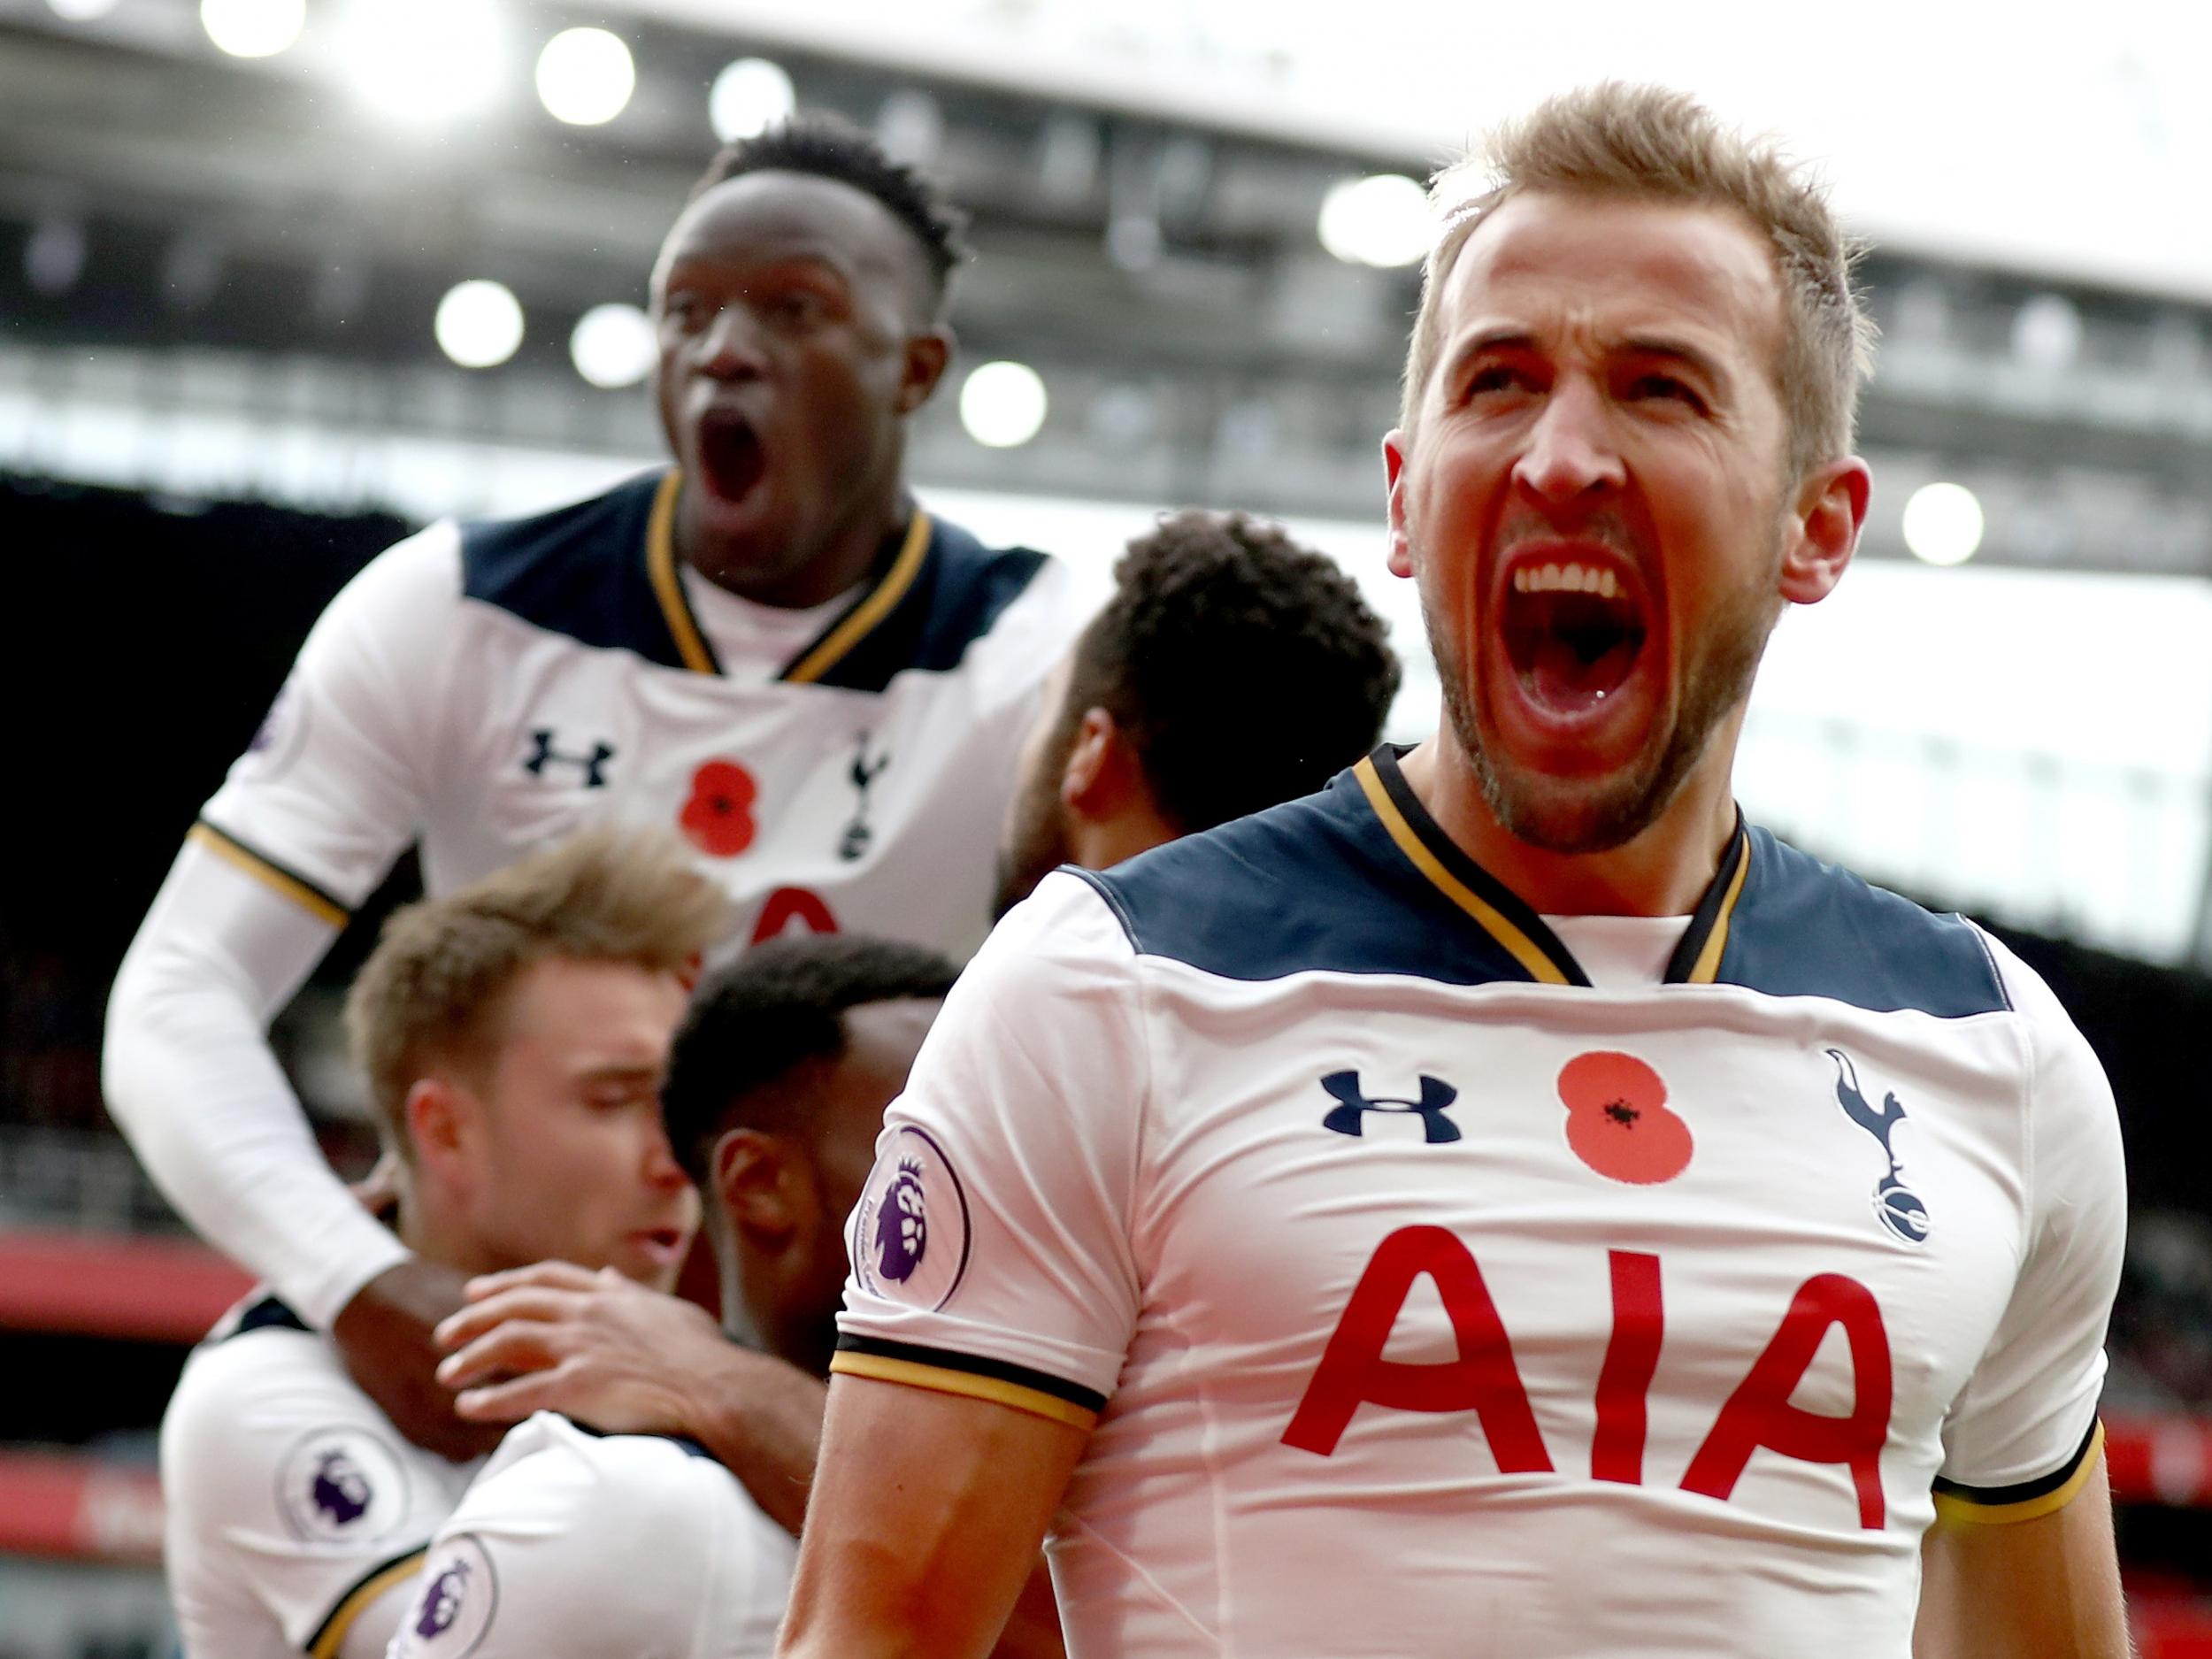 Tottenham will play their final game of the season in Hong Kong